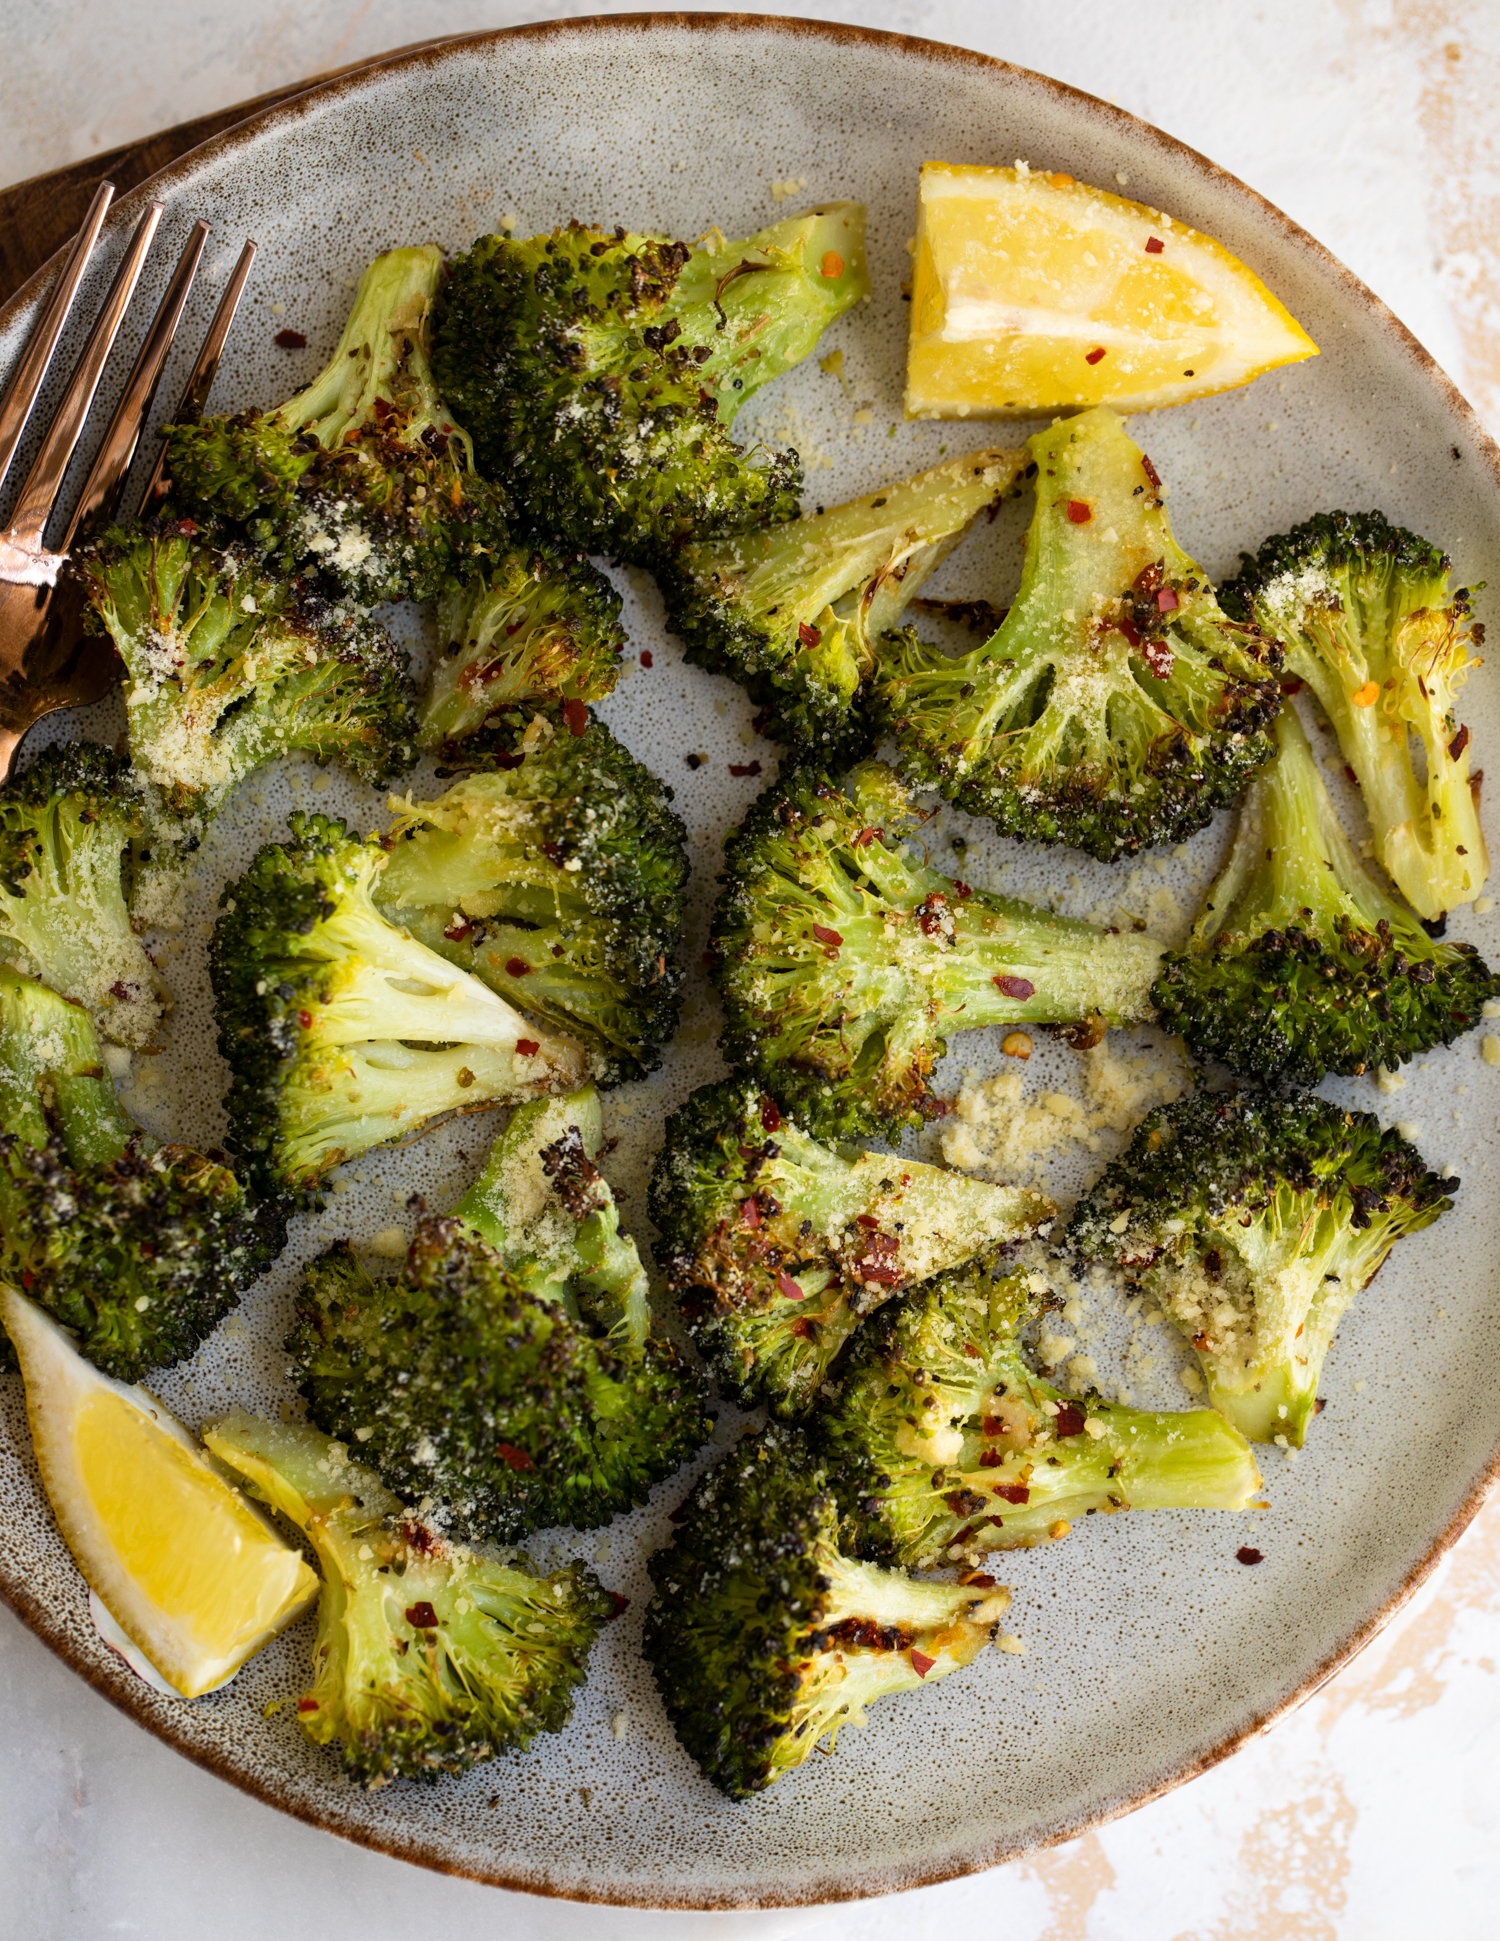 Roasted broccoli on a plate with lemon wedges.